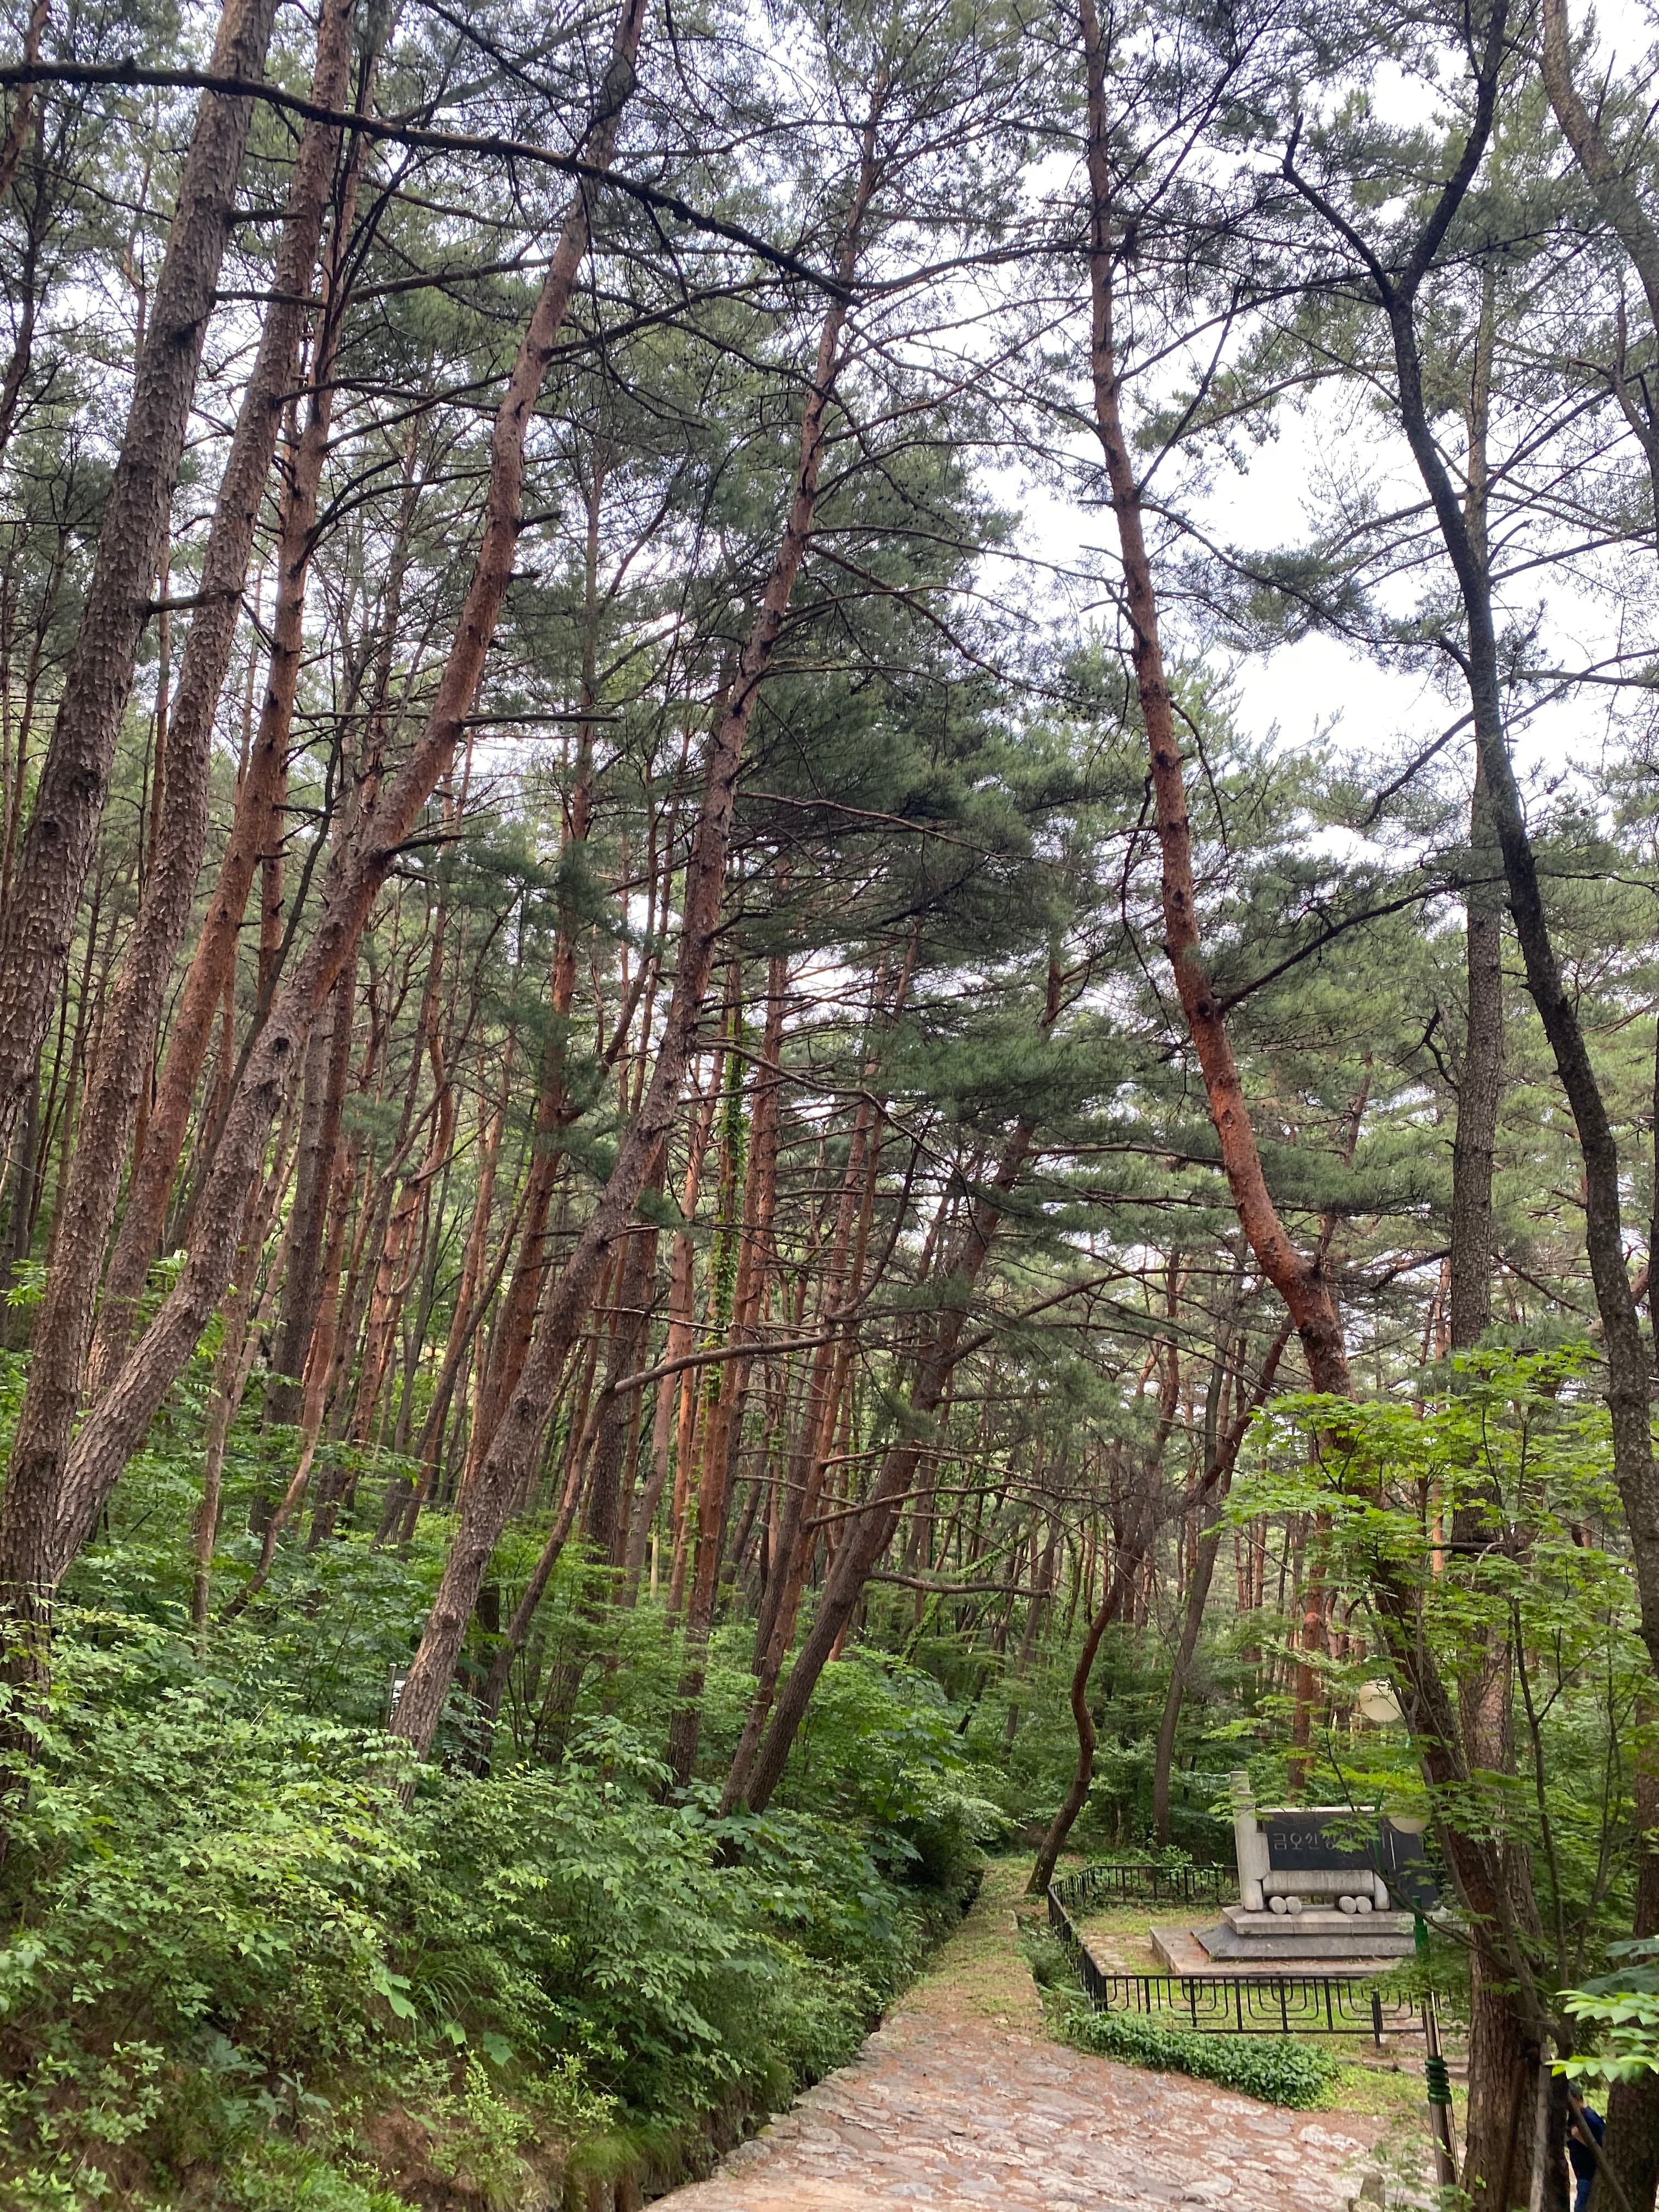 Trees lining a hiking trail